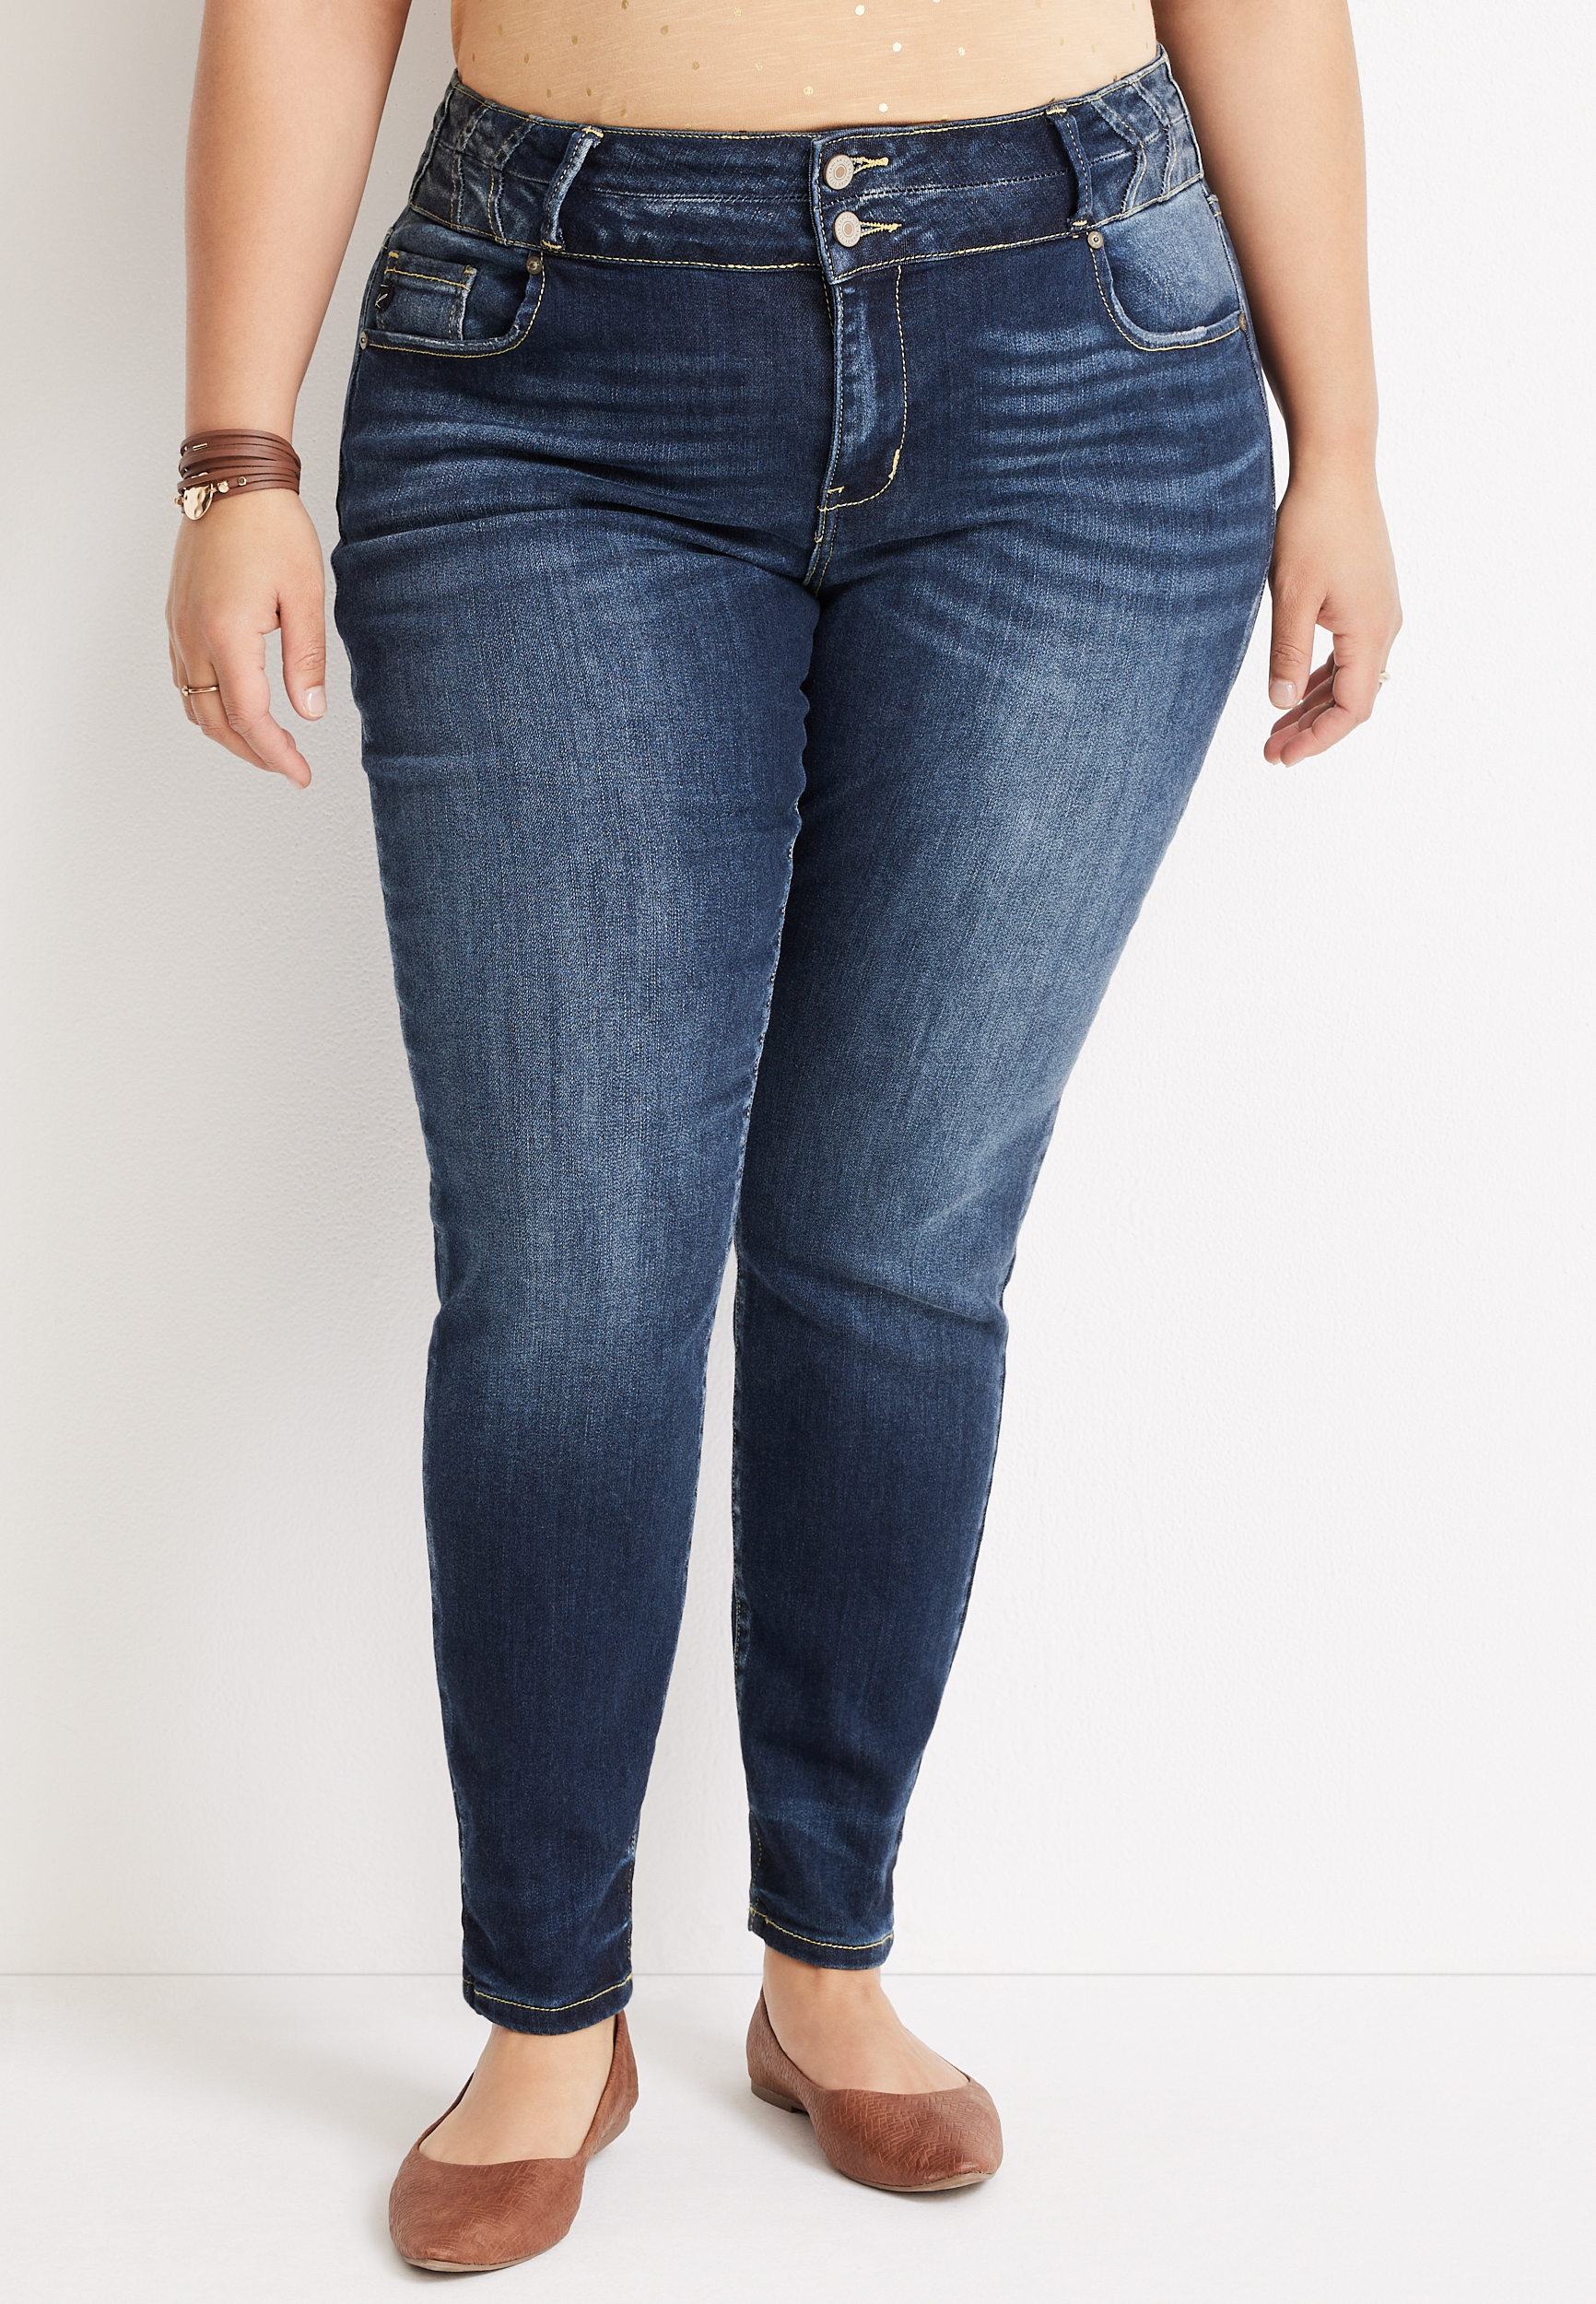 Plus Size KanCan™ Skinny High Rise Novelty Waist Jean | maurices